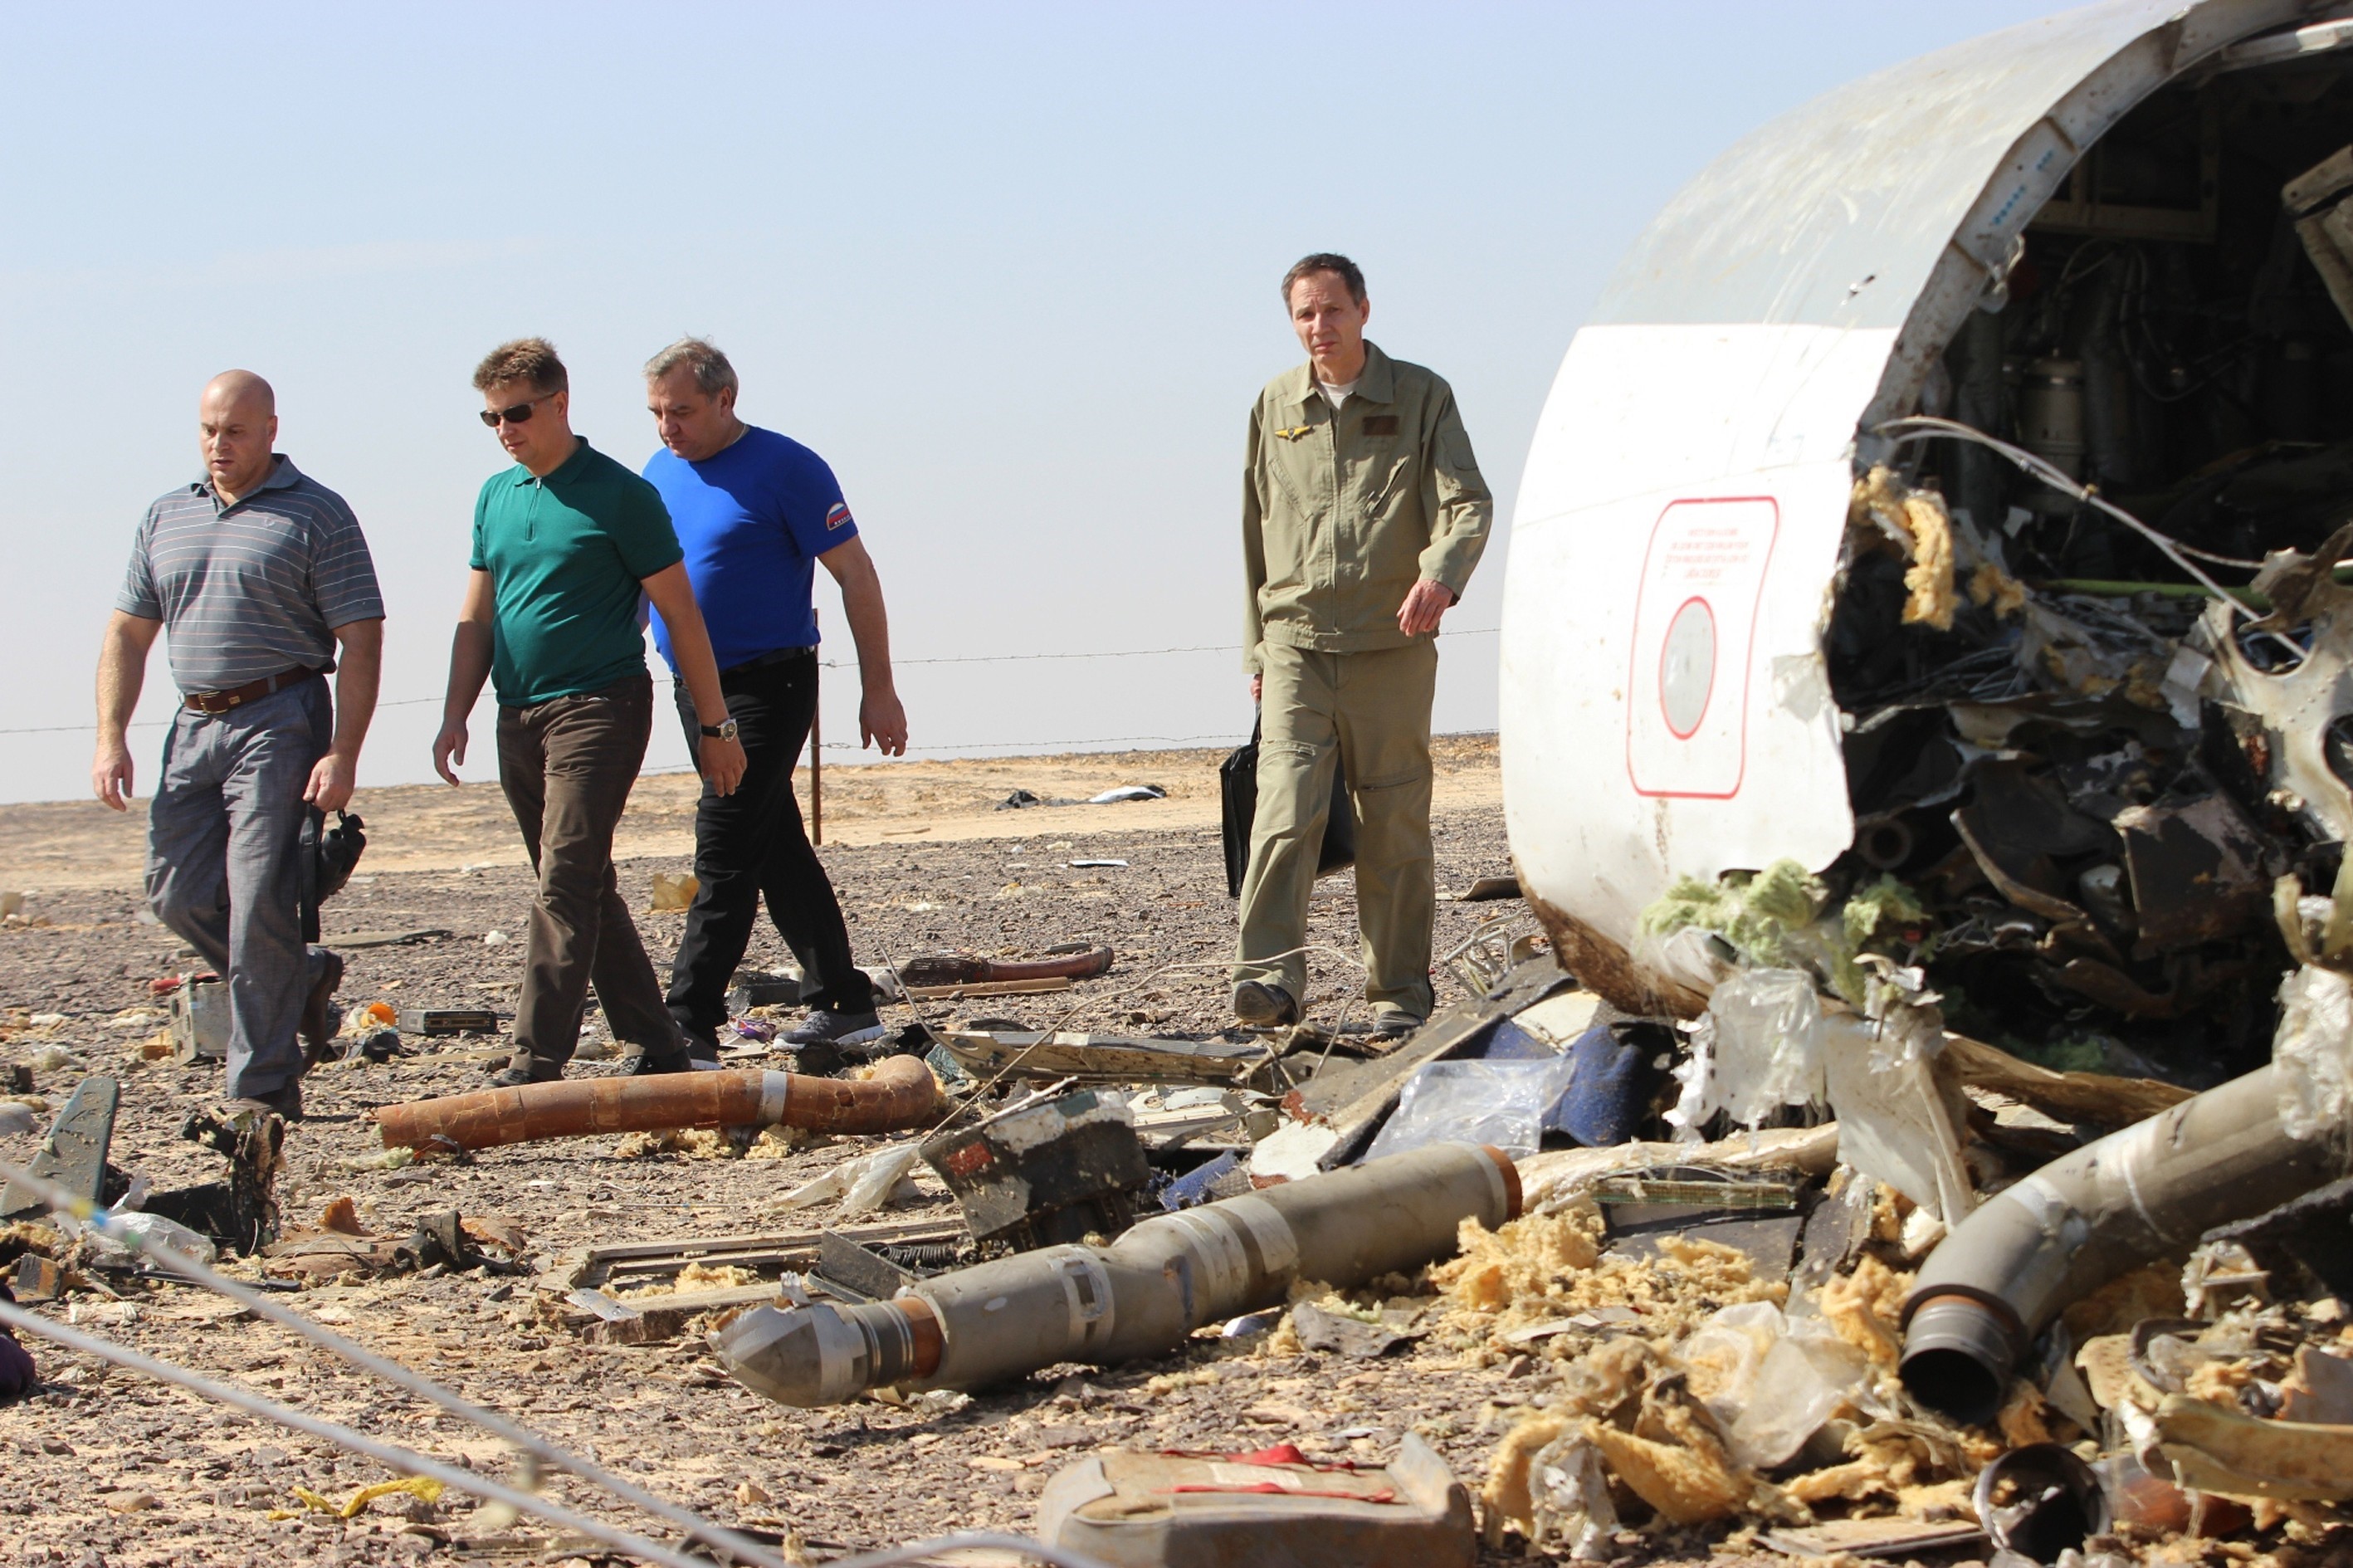 Russian Minister of Emergency Situations Vladimir Puchkov (3rd L) inspect the crash site of Russian Airliner in Suez, Egypt on November 01, 2015. (Anadolu Agency&mdash;Getty Images)